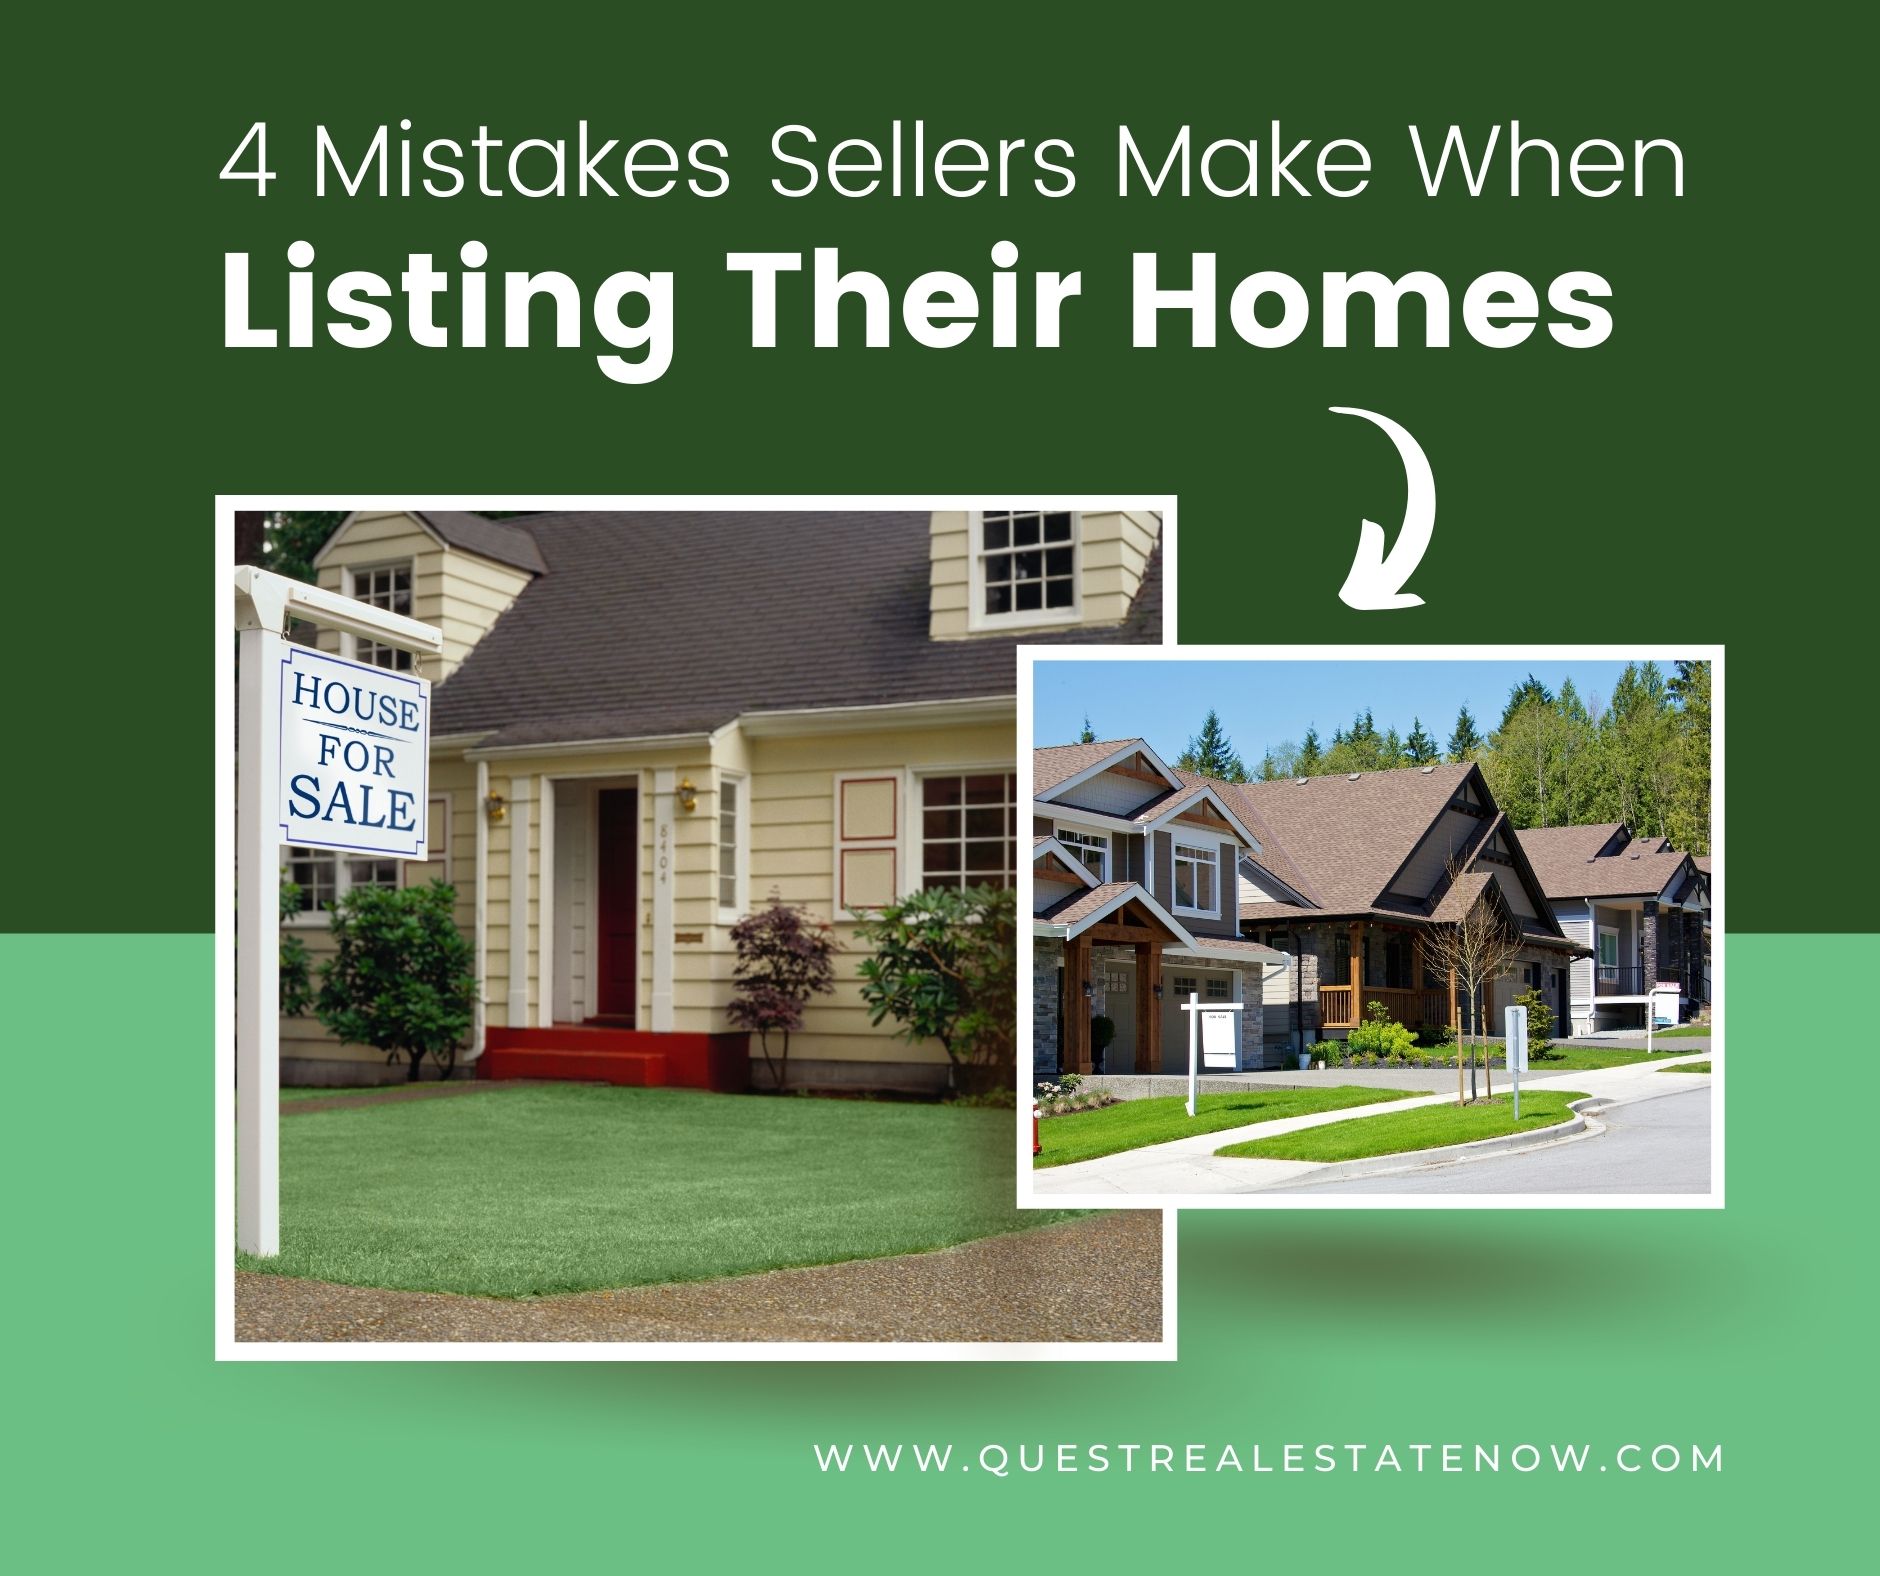 4 Mistakes Sellers Make When Listing Their Homes